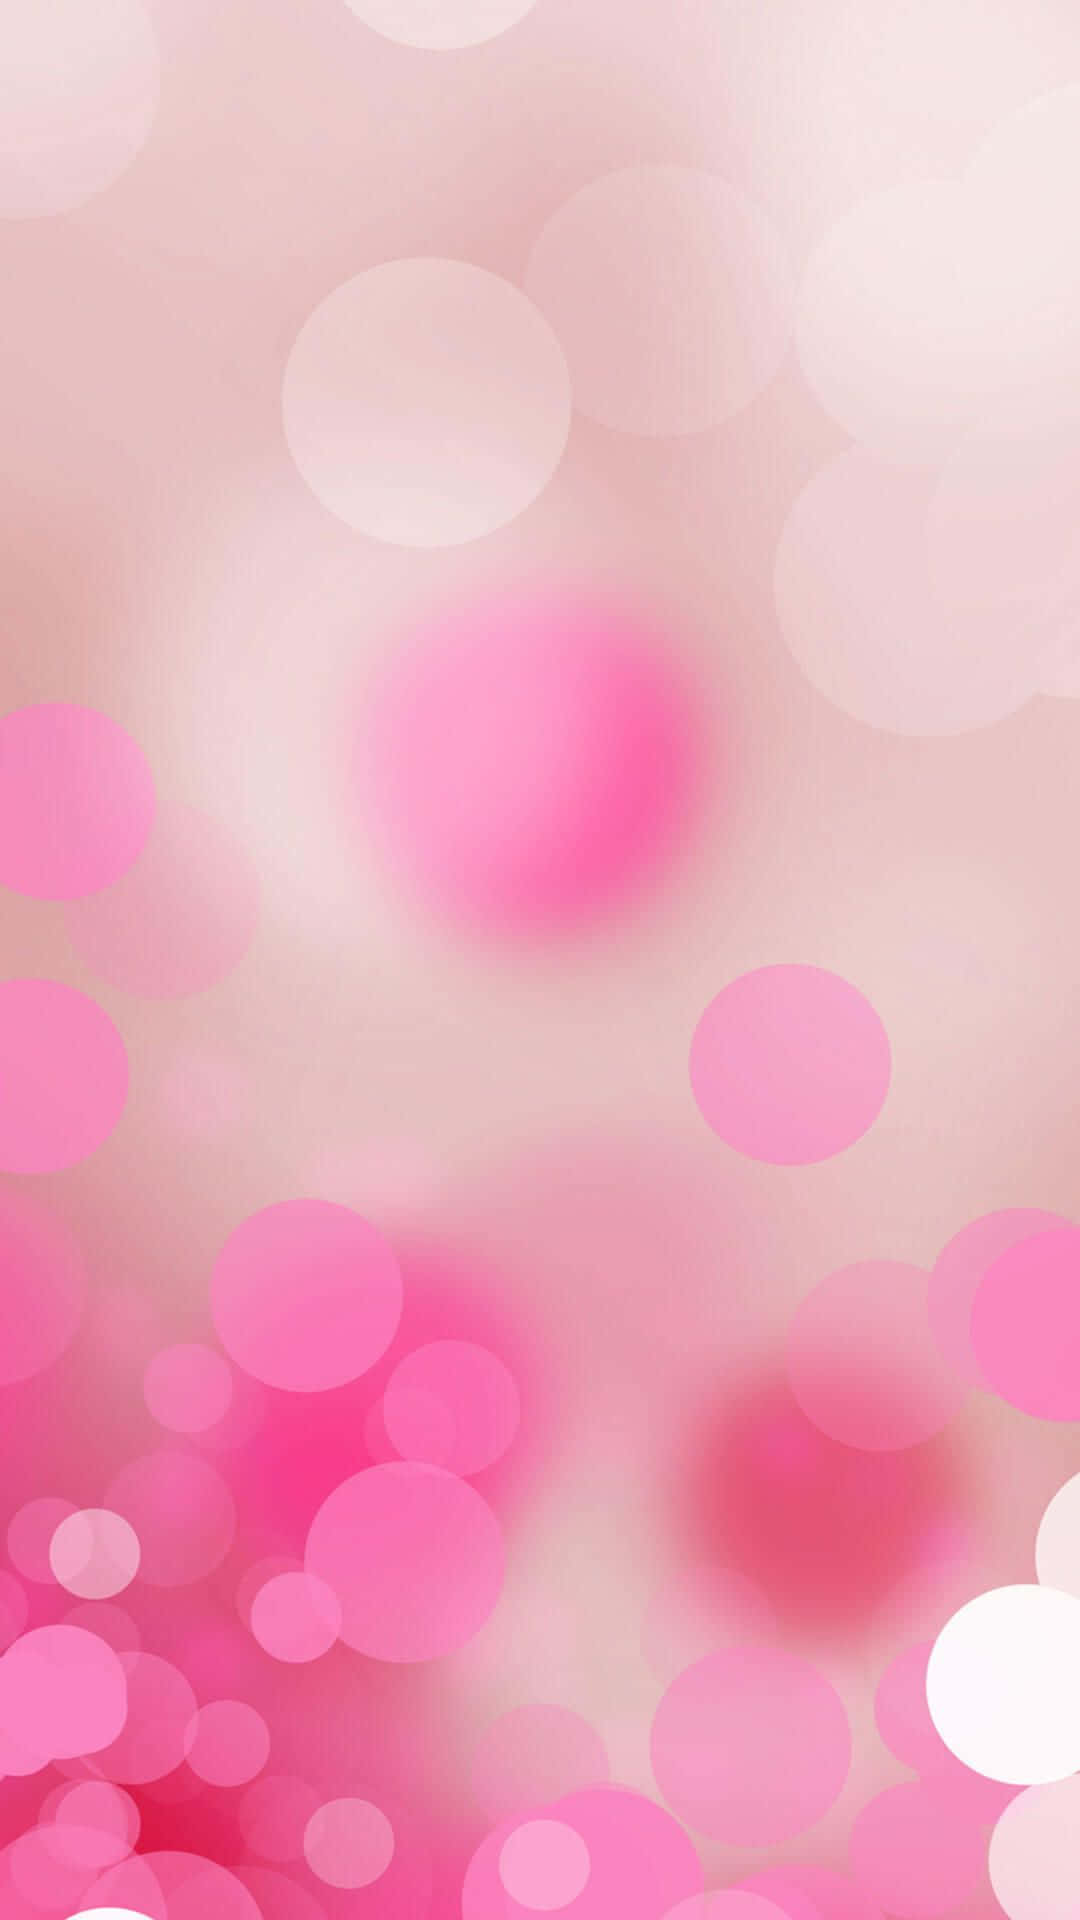 Blurry Pink Spots Girly Tumblr Background